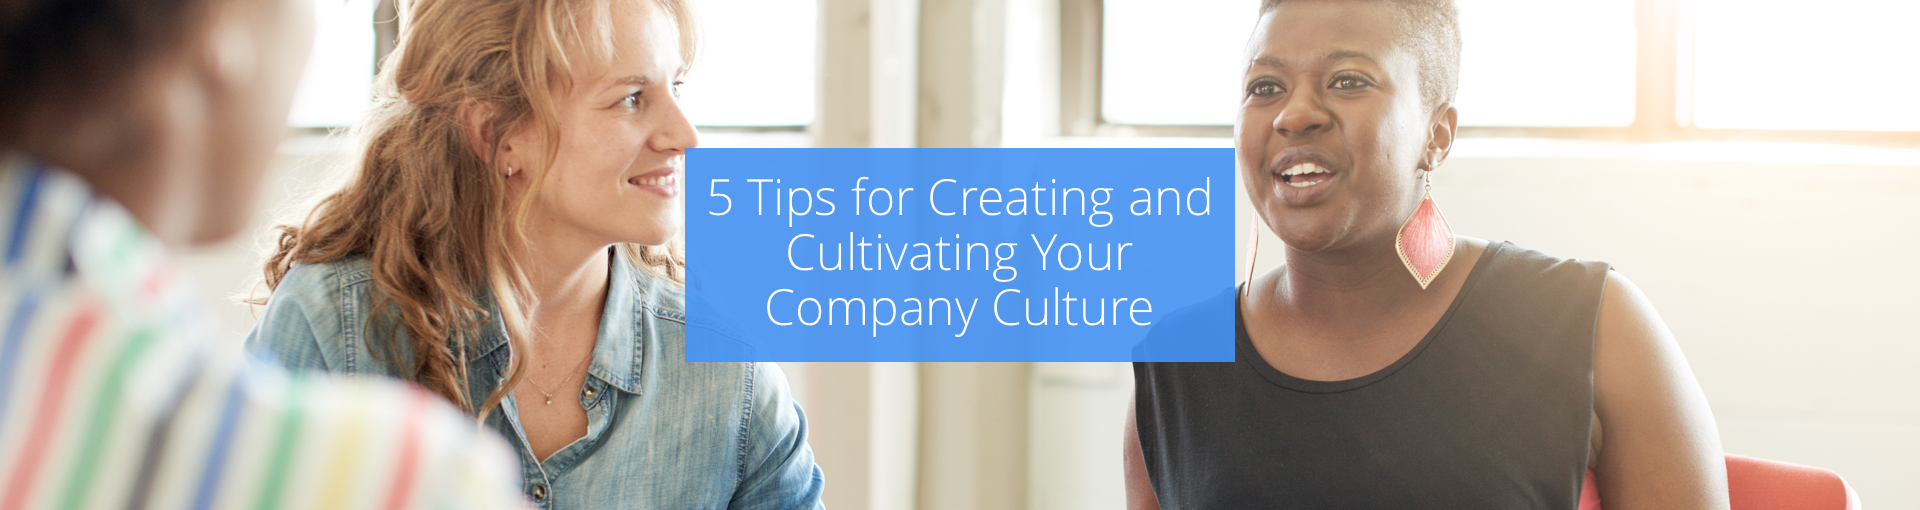 5 Tips for Creating and Cultivating Your Company Culture Featured Image